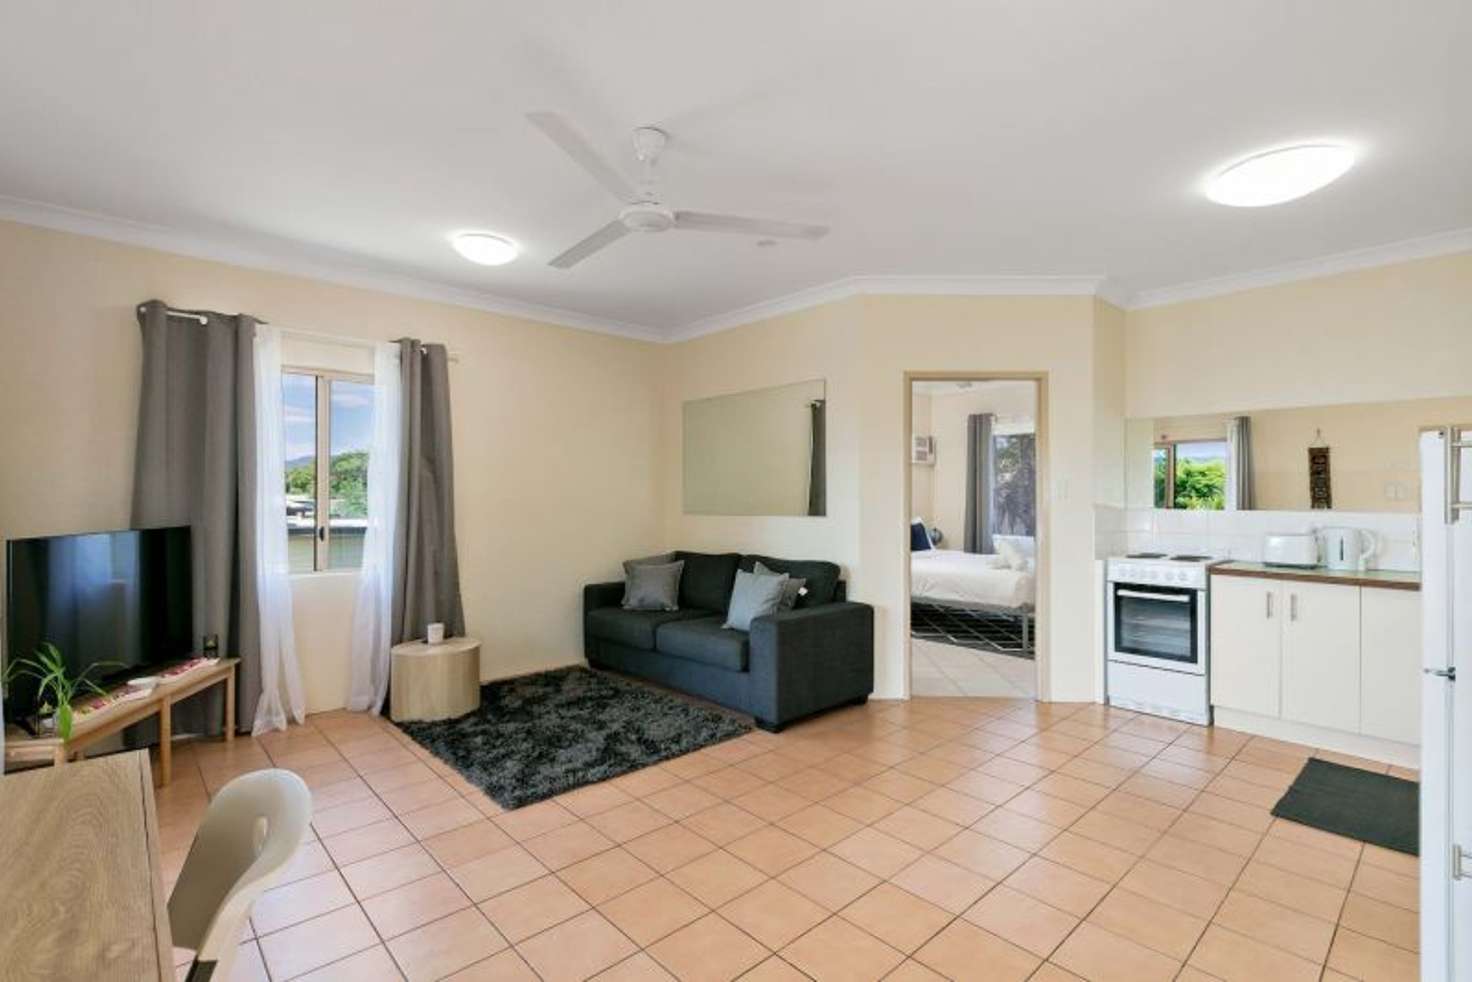 Main view of Homely unit listing, 7/217 Spence Street, Bungalow QLD 4870